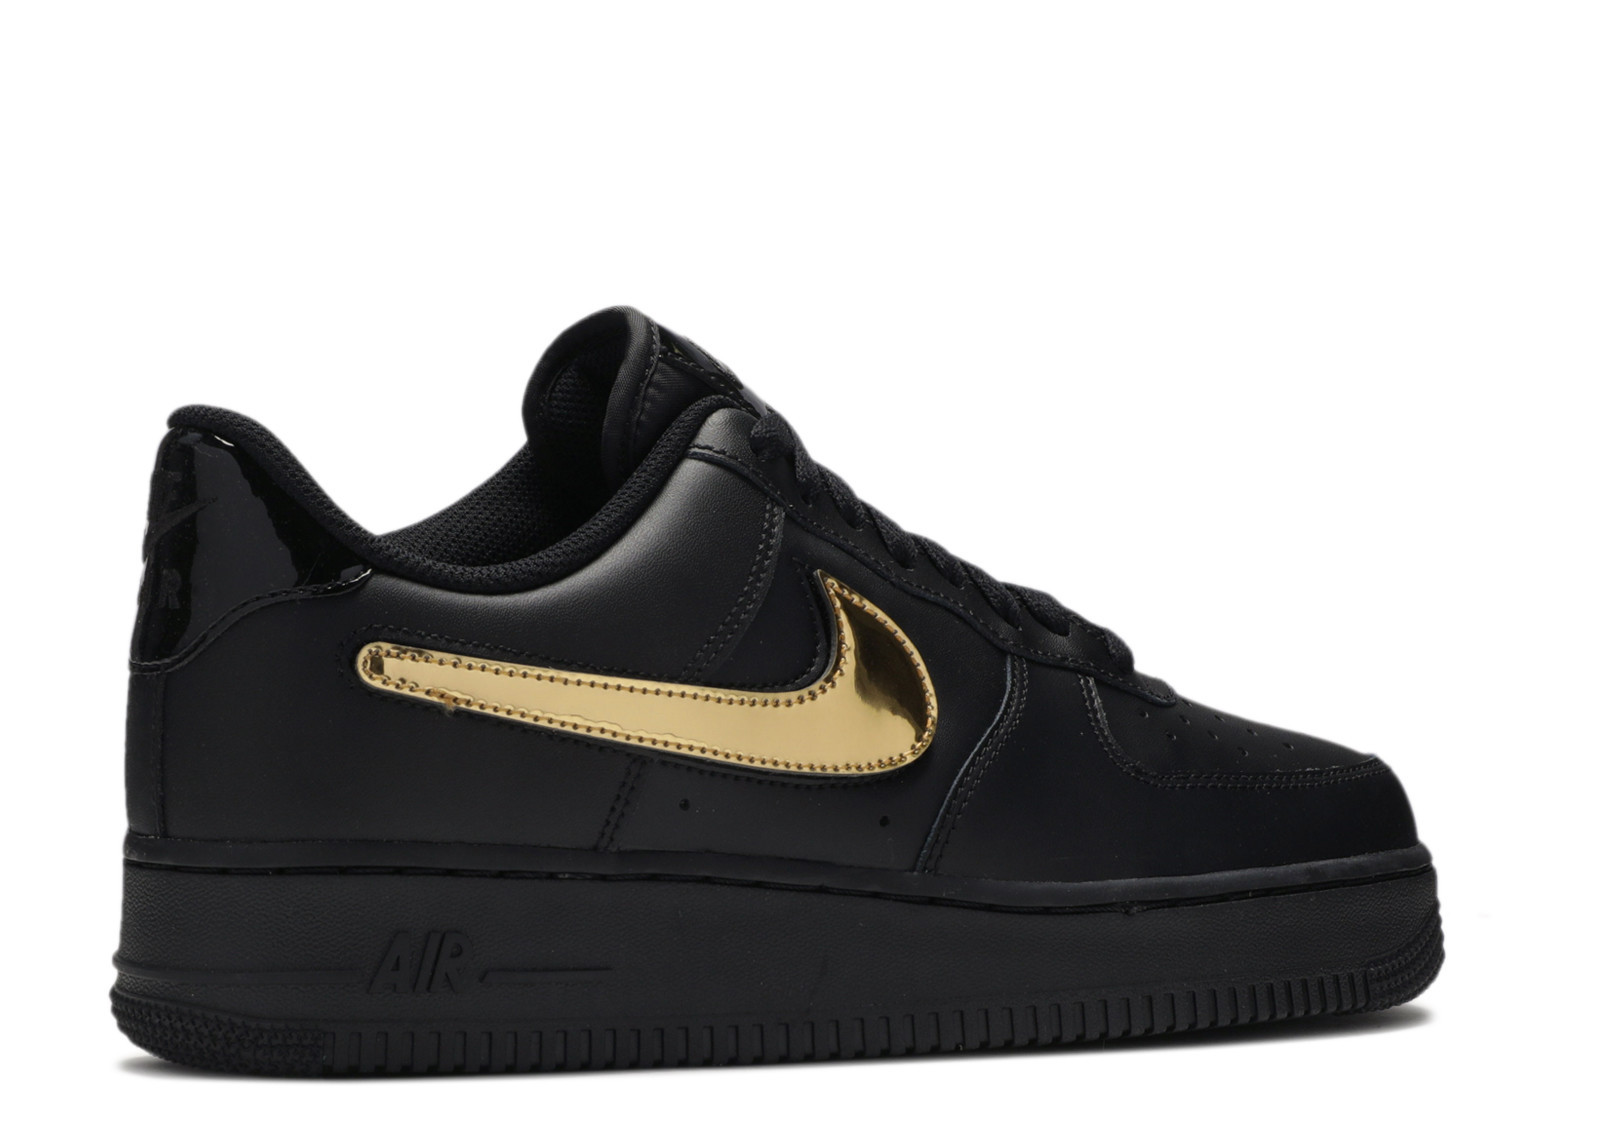 AIR FORCE 1 LOW "BLACK REMOVABLE SWOOSH" image 3